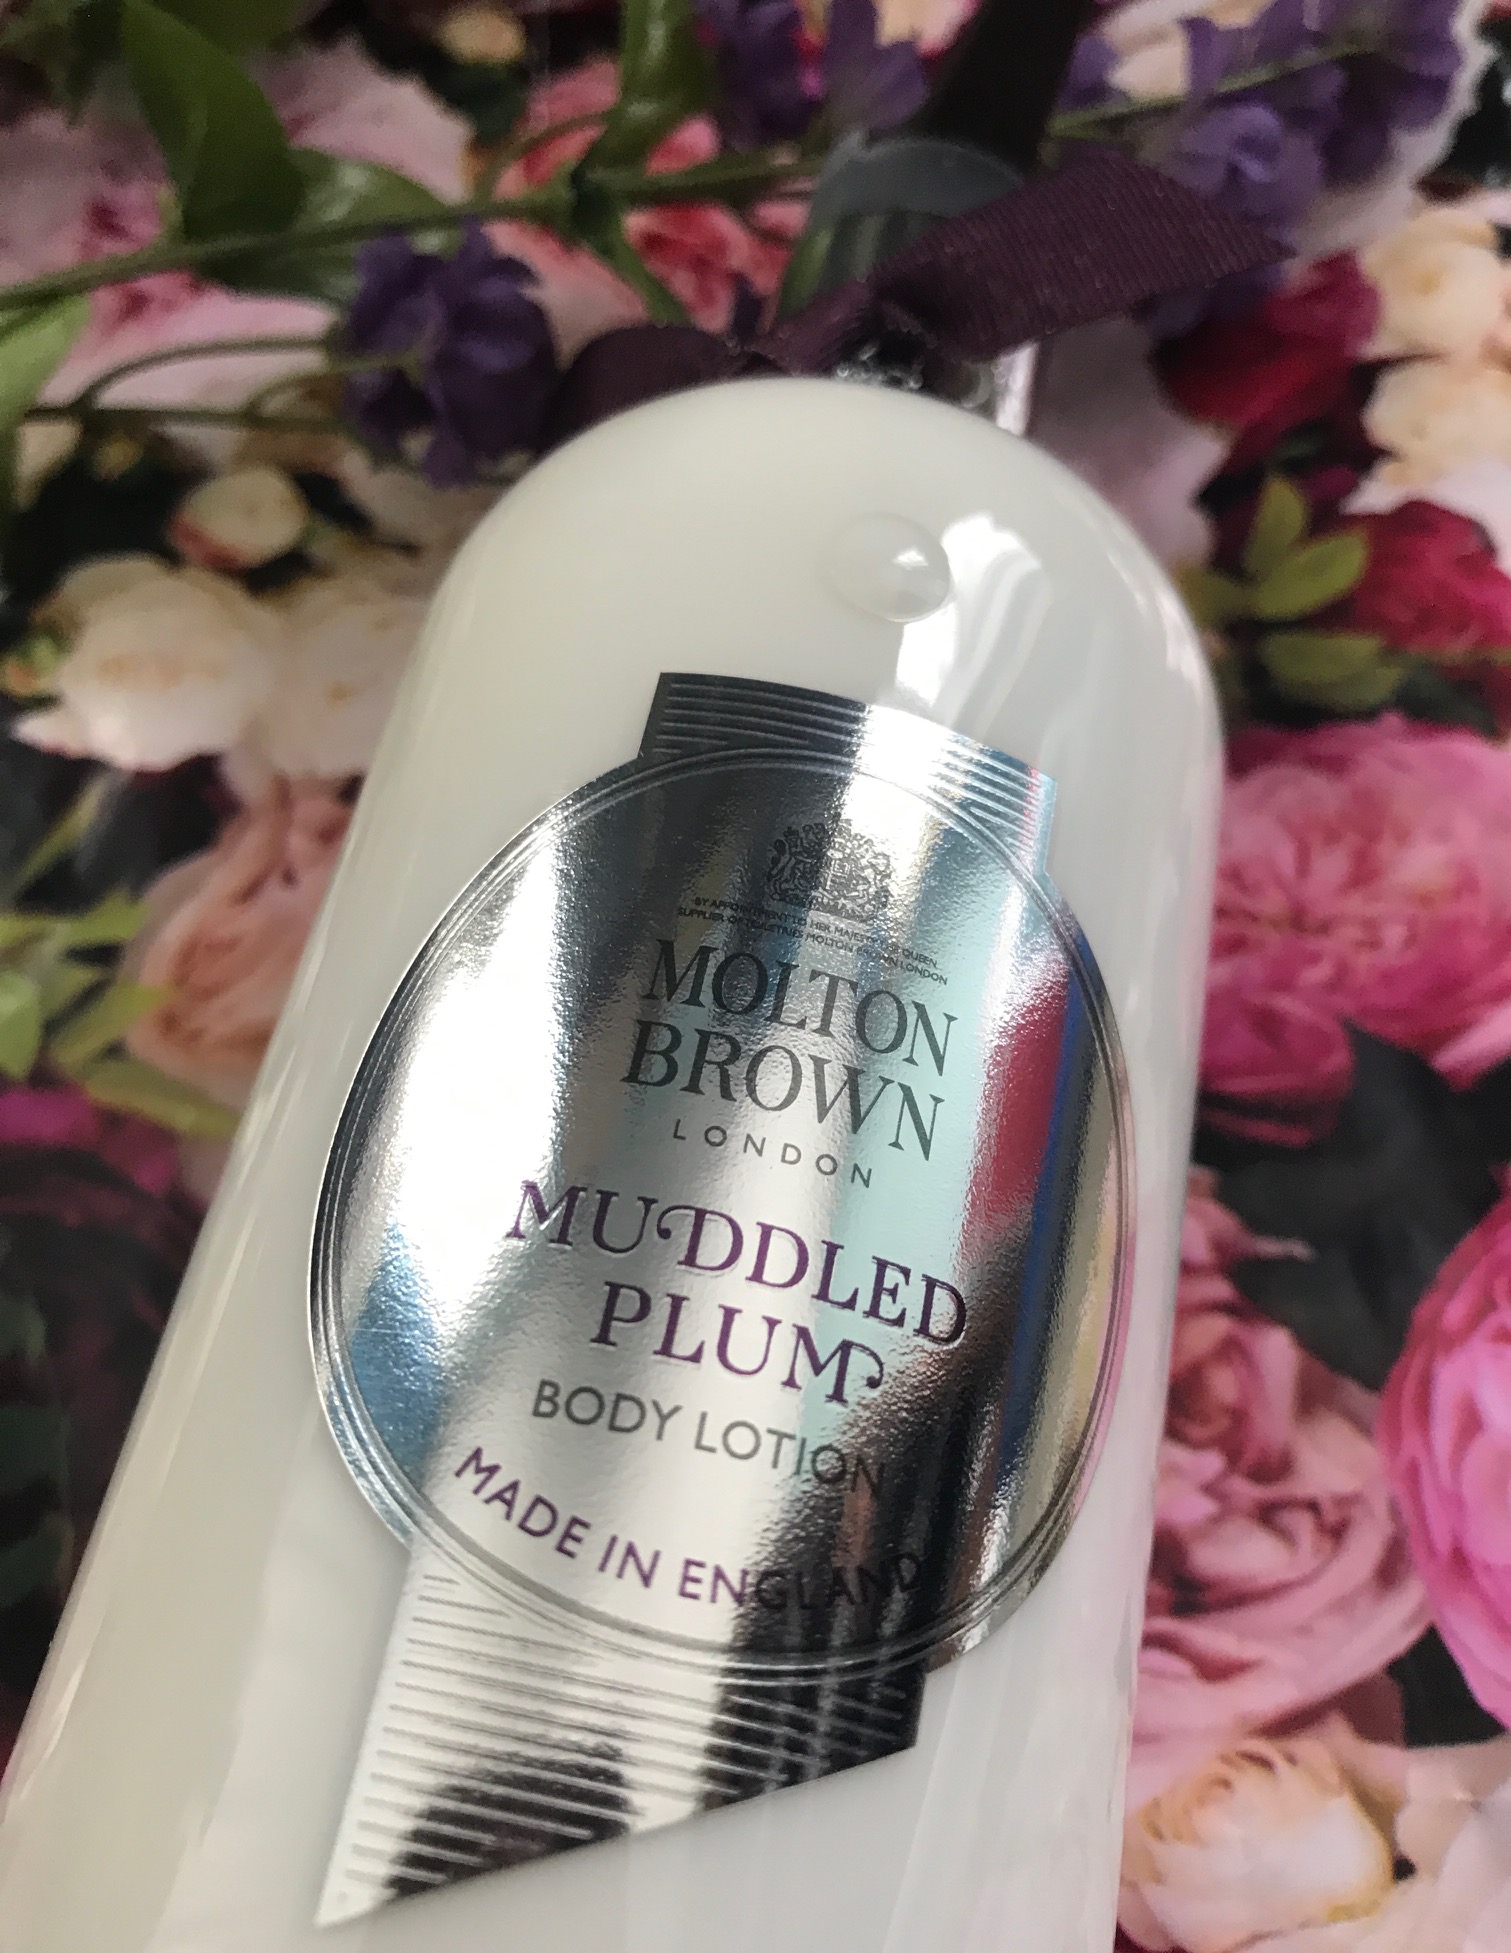 closeup of the label of the bottle of Molton Brown Muddled Plum Body Lotion, neversaydiebeauty.com